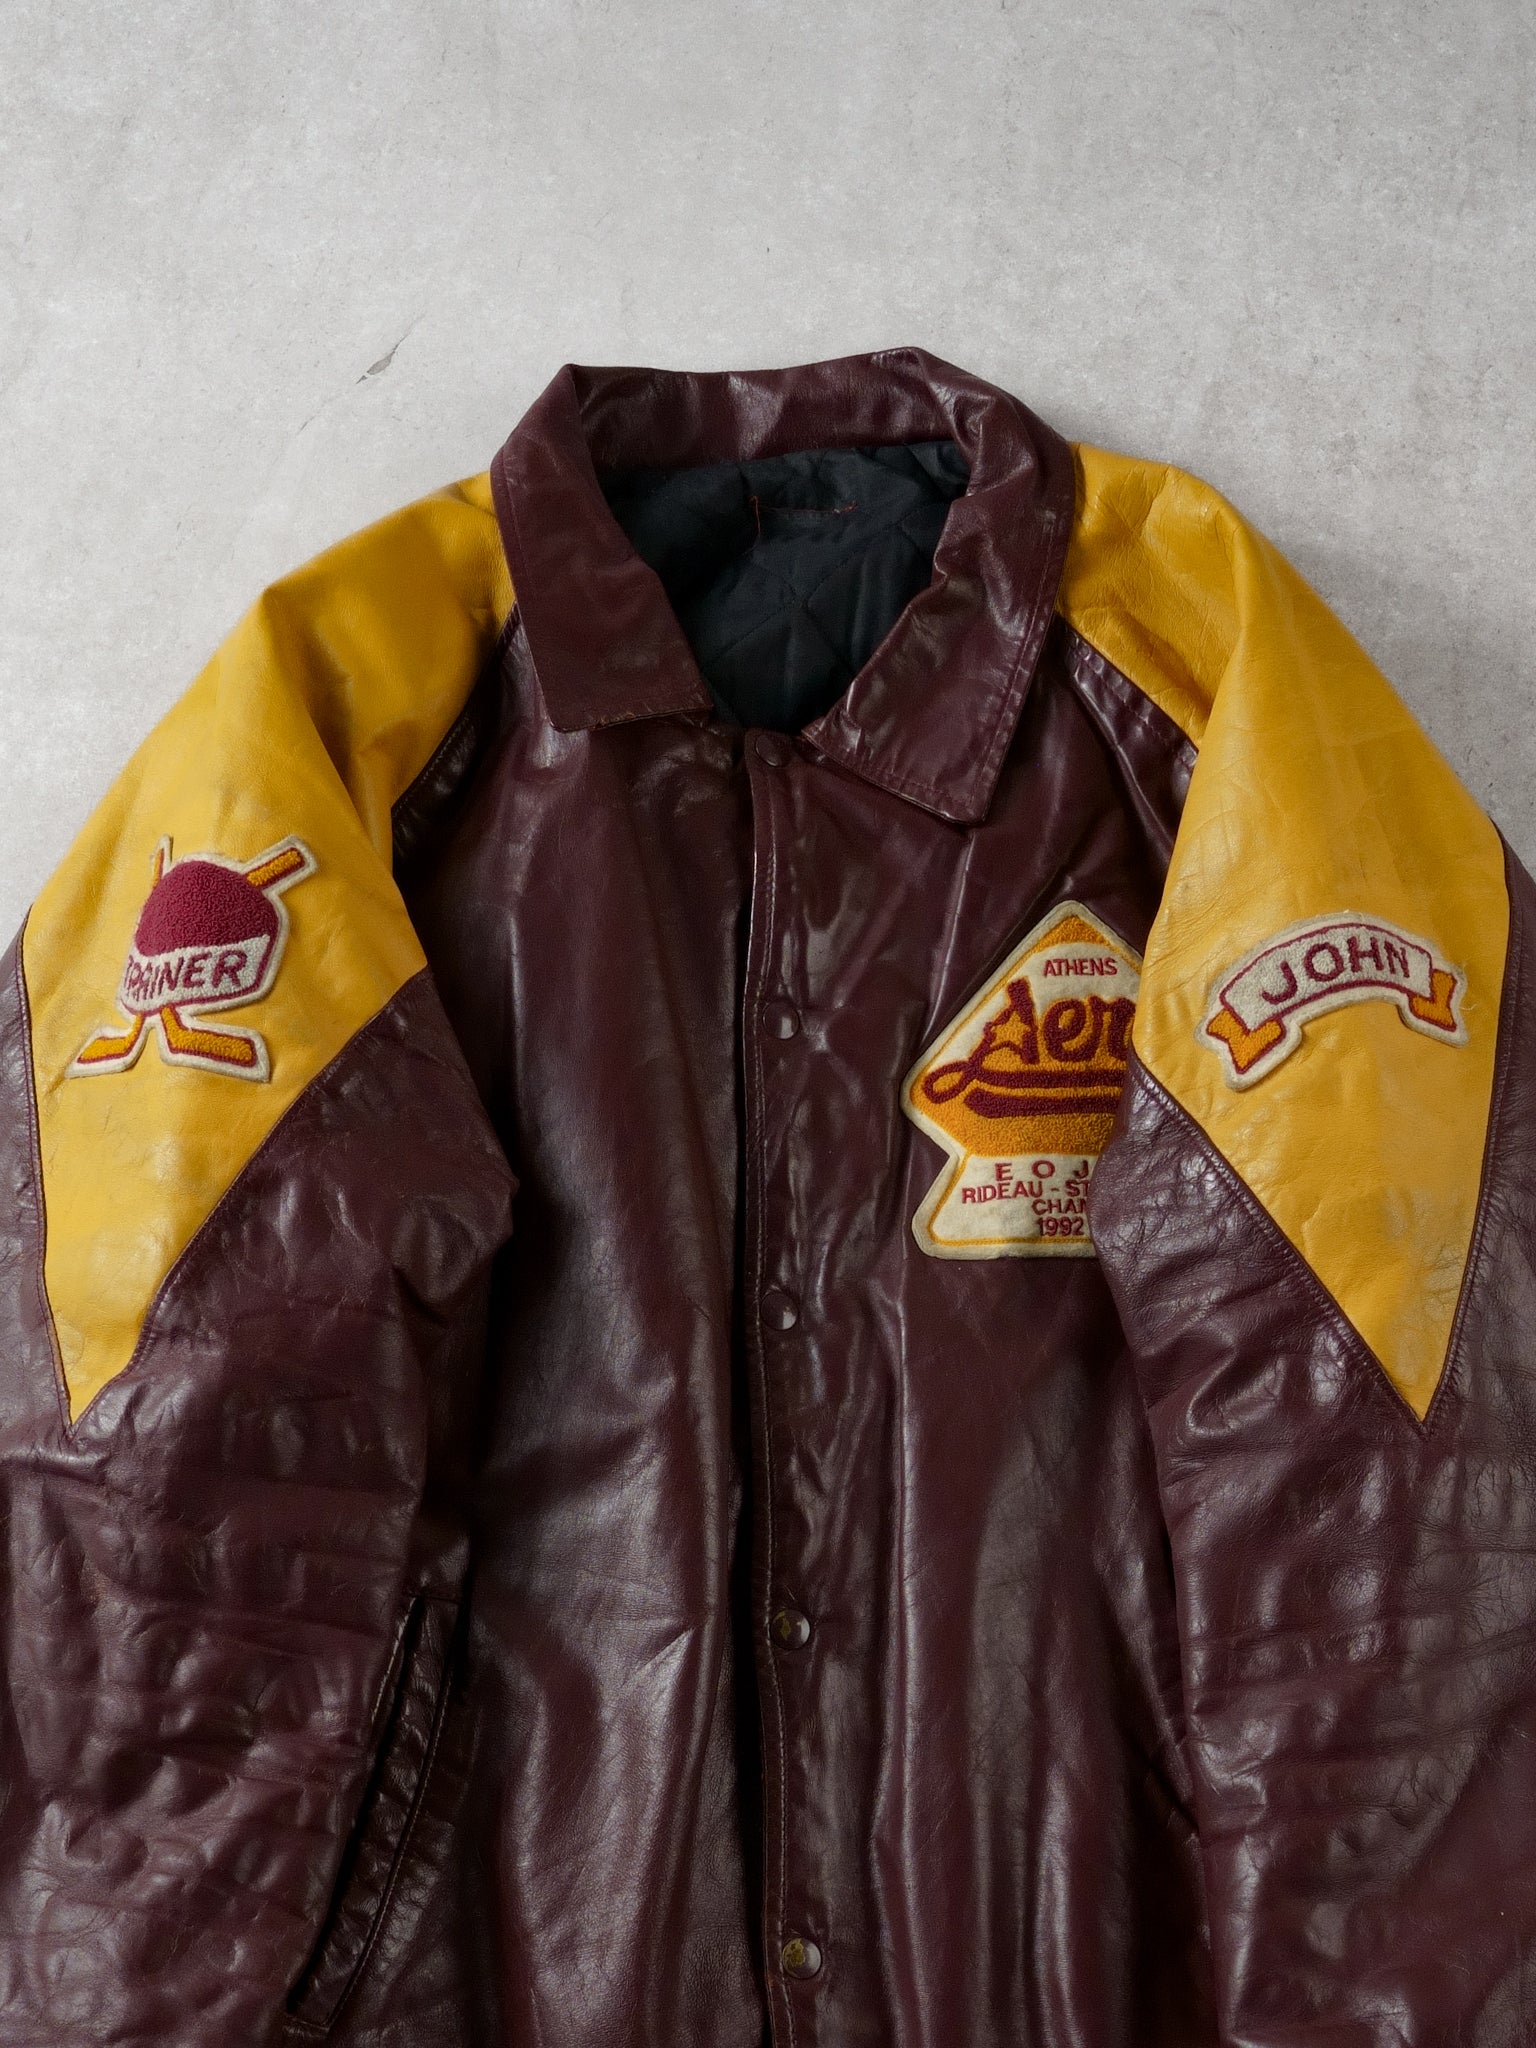 Vintage 93' Maroon and Yellow Athens Aeros Leather Jacket (L)